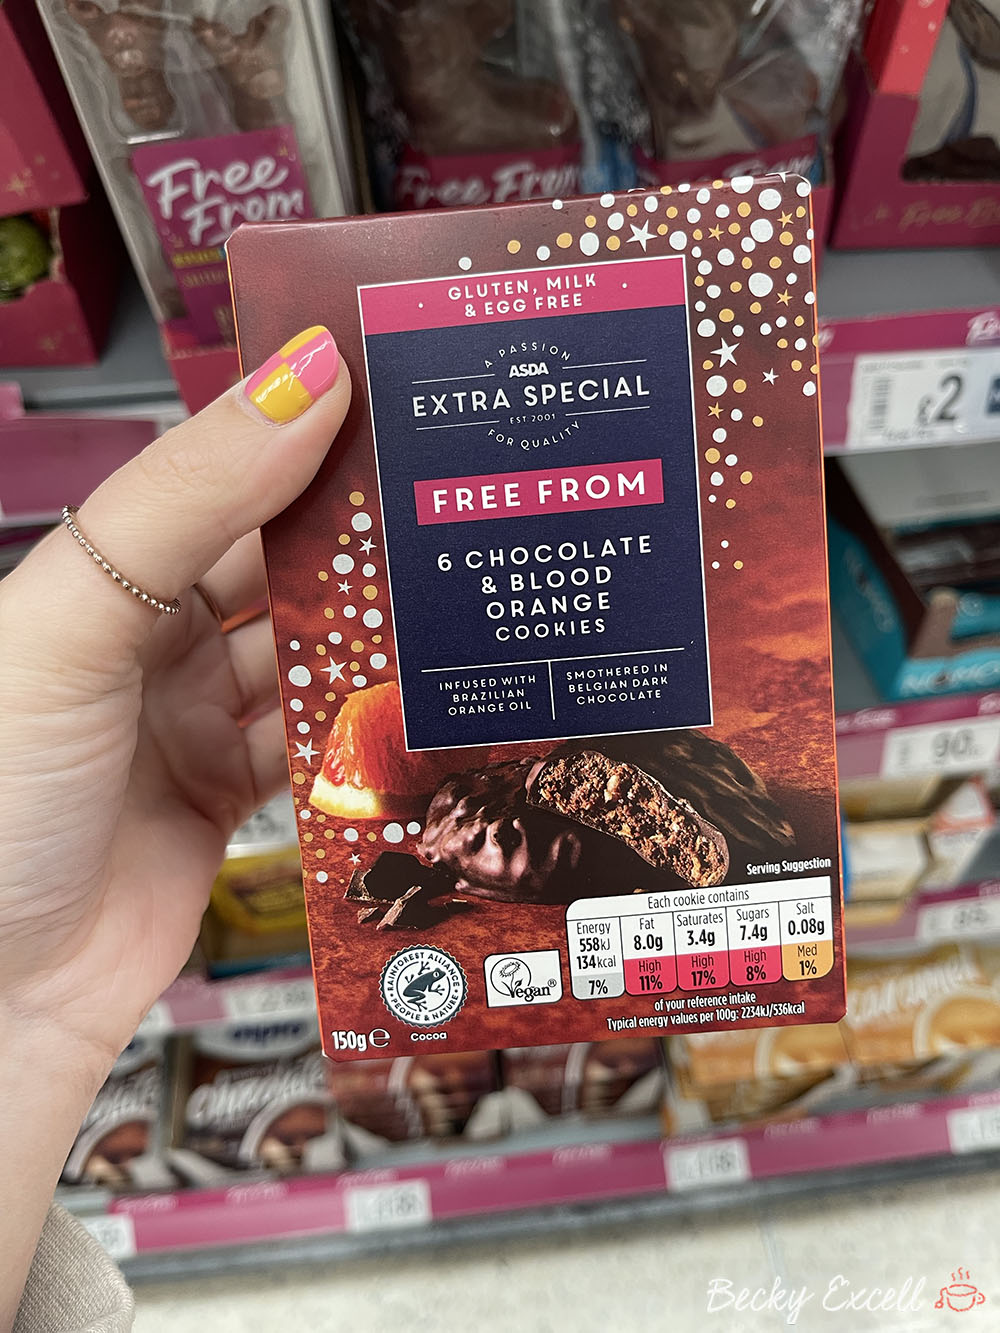 Asda's gluten-free Christmas products 2021: 6 Chocolate and Blood Orange Cookies